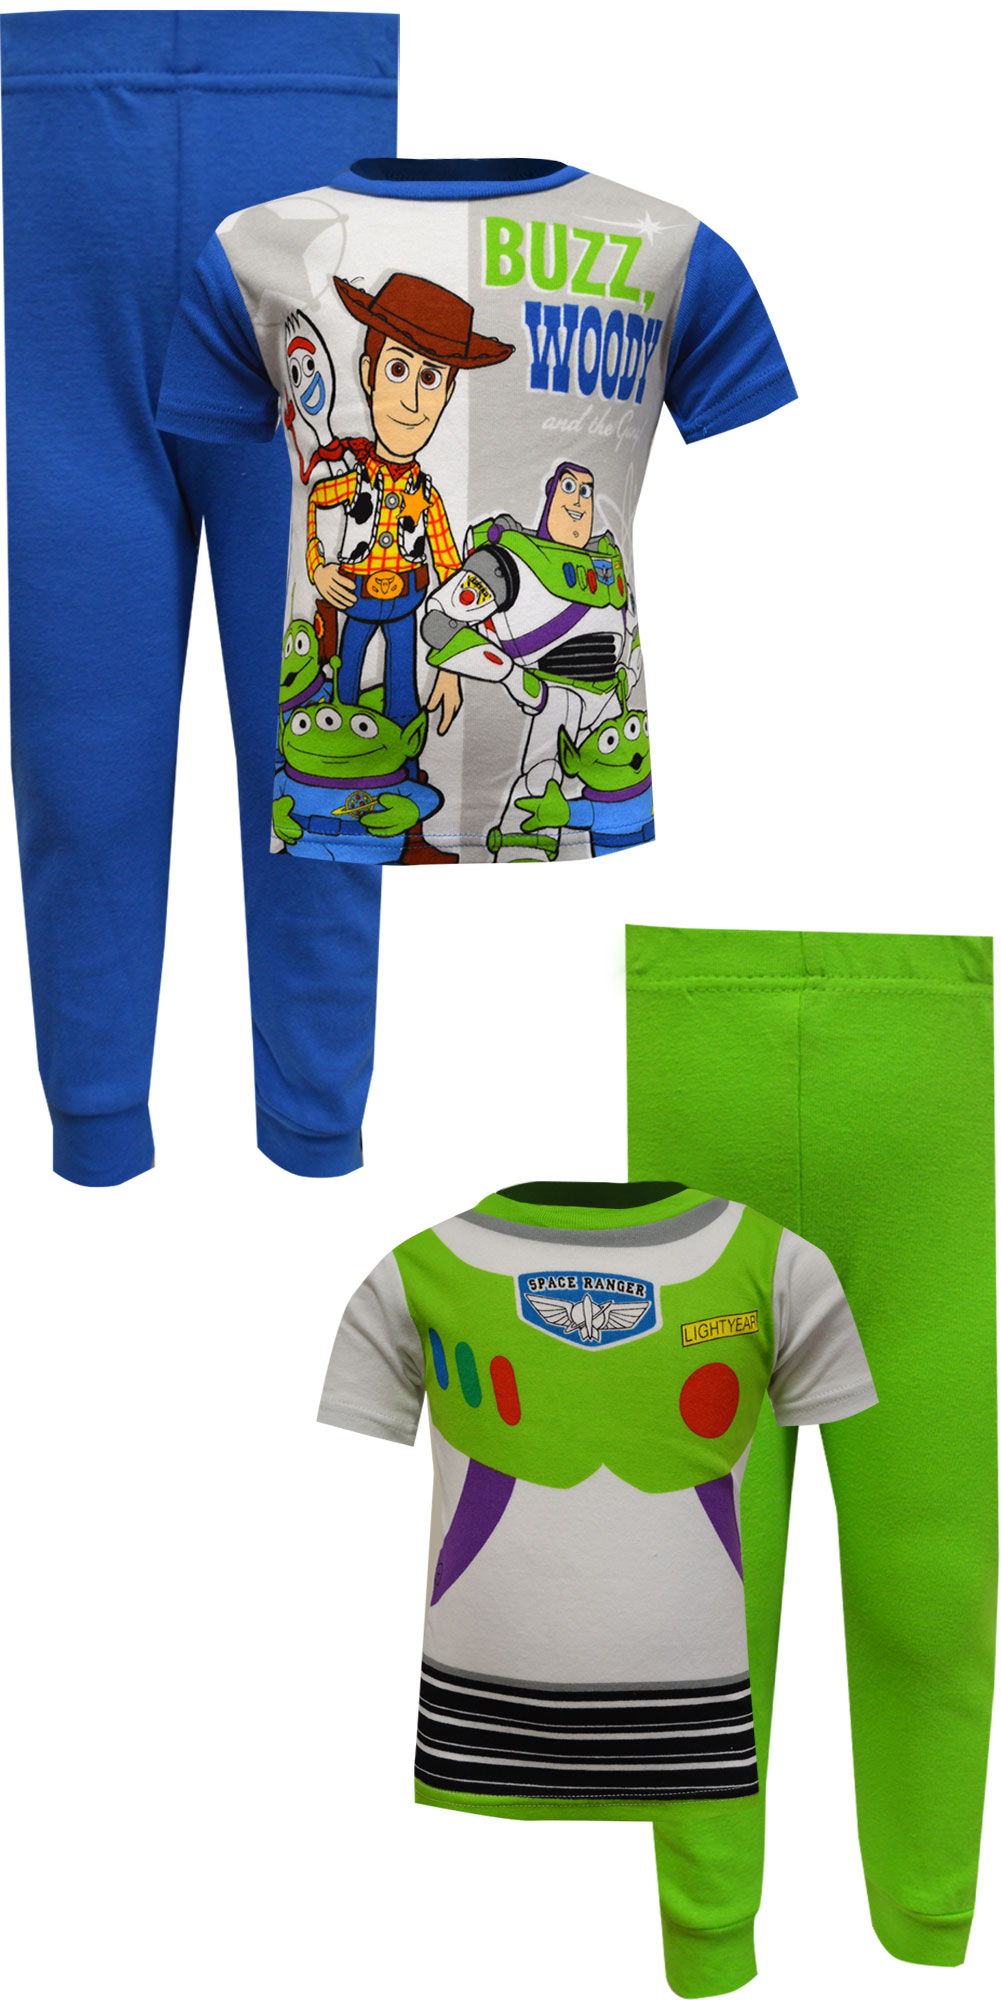 Share your Toys on it. Disney Pixar Toy Story Holiday pajamas Size 2T Long sleeve shirt and pants Woody and Buzz Lightyear have santa hats